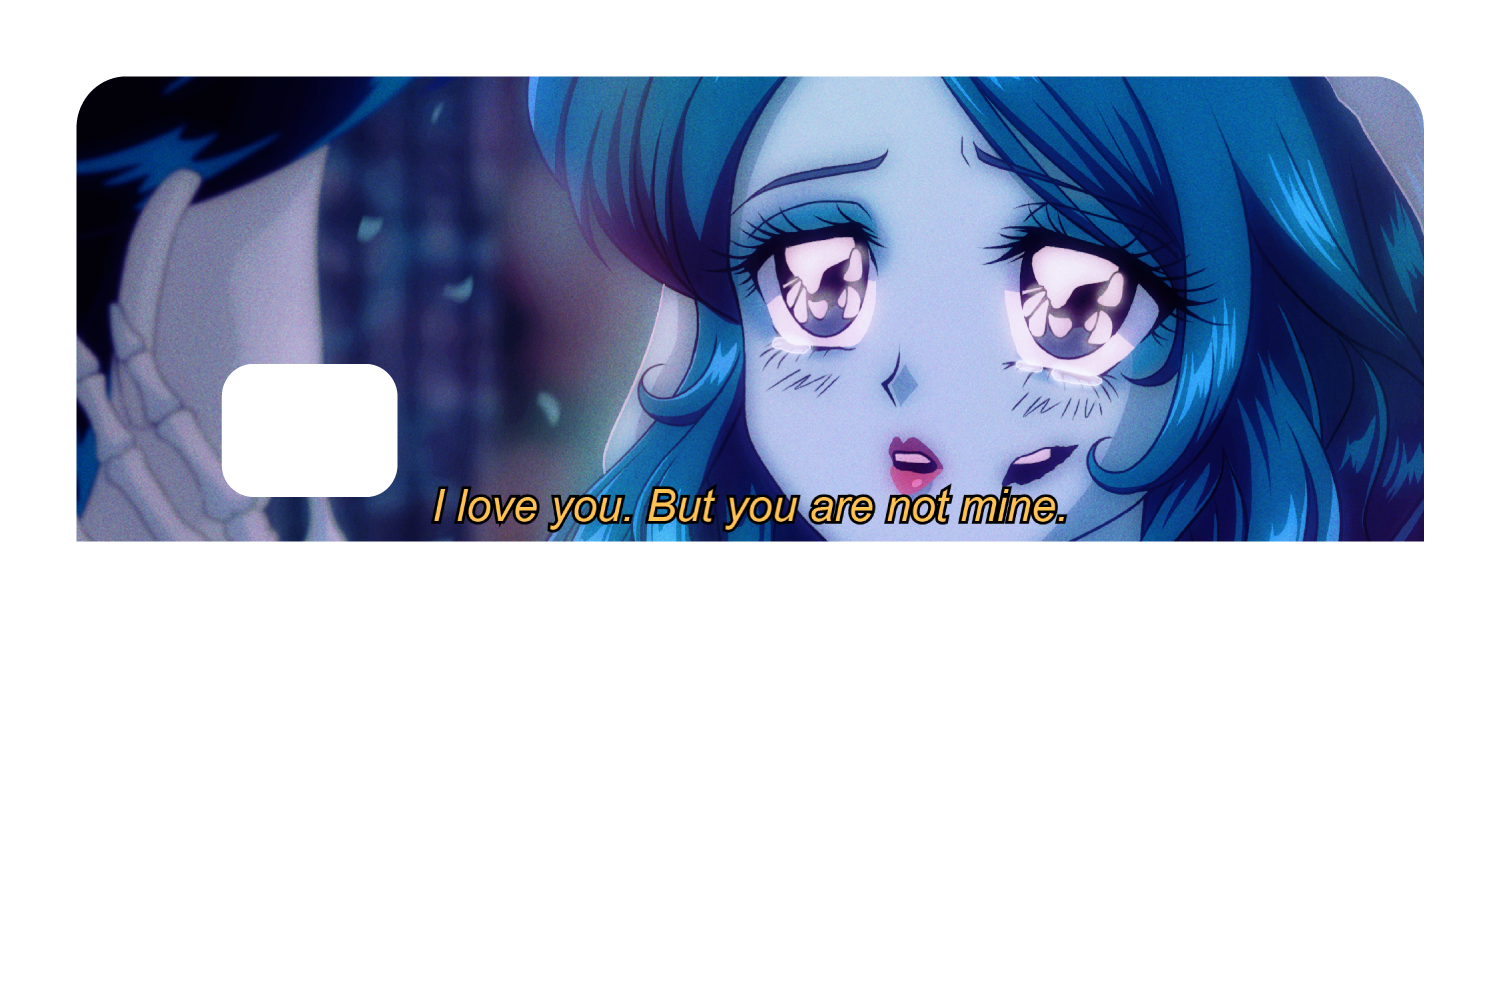 Corpse Bride - I love you but